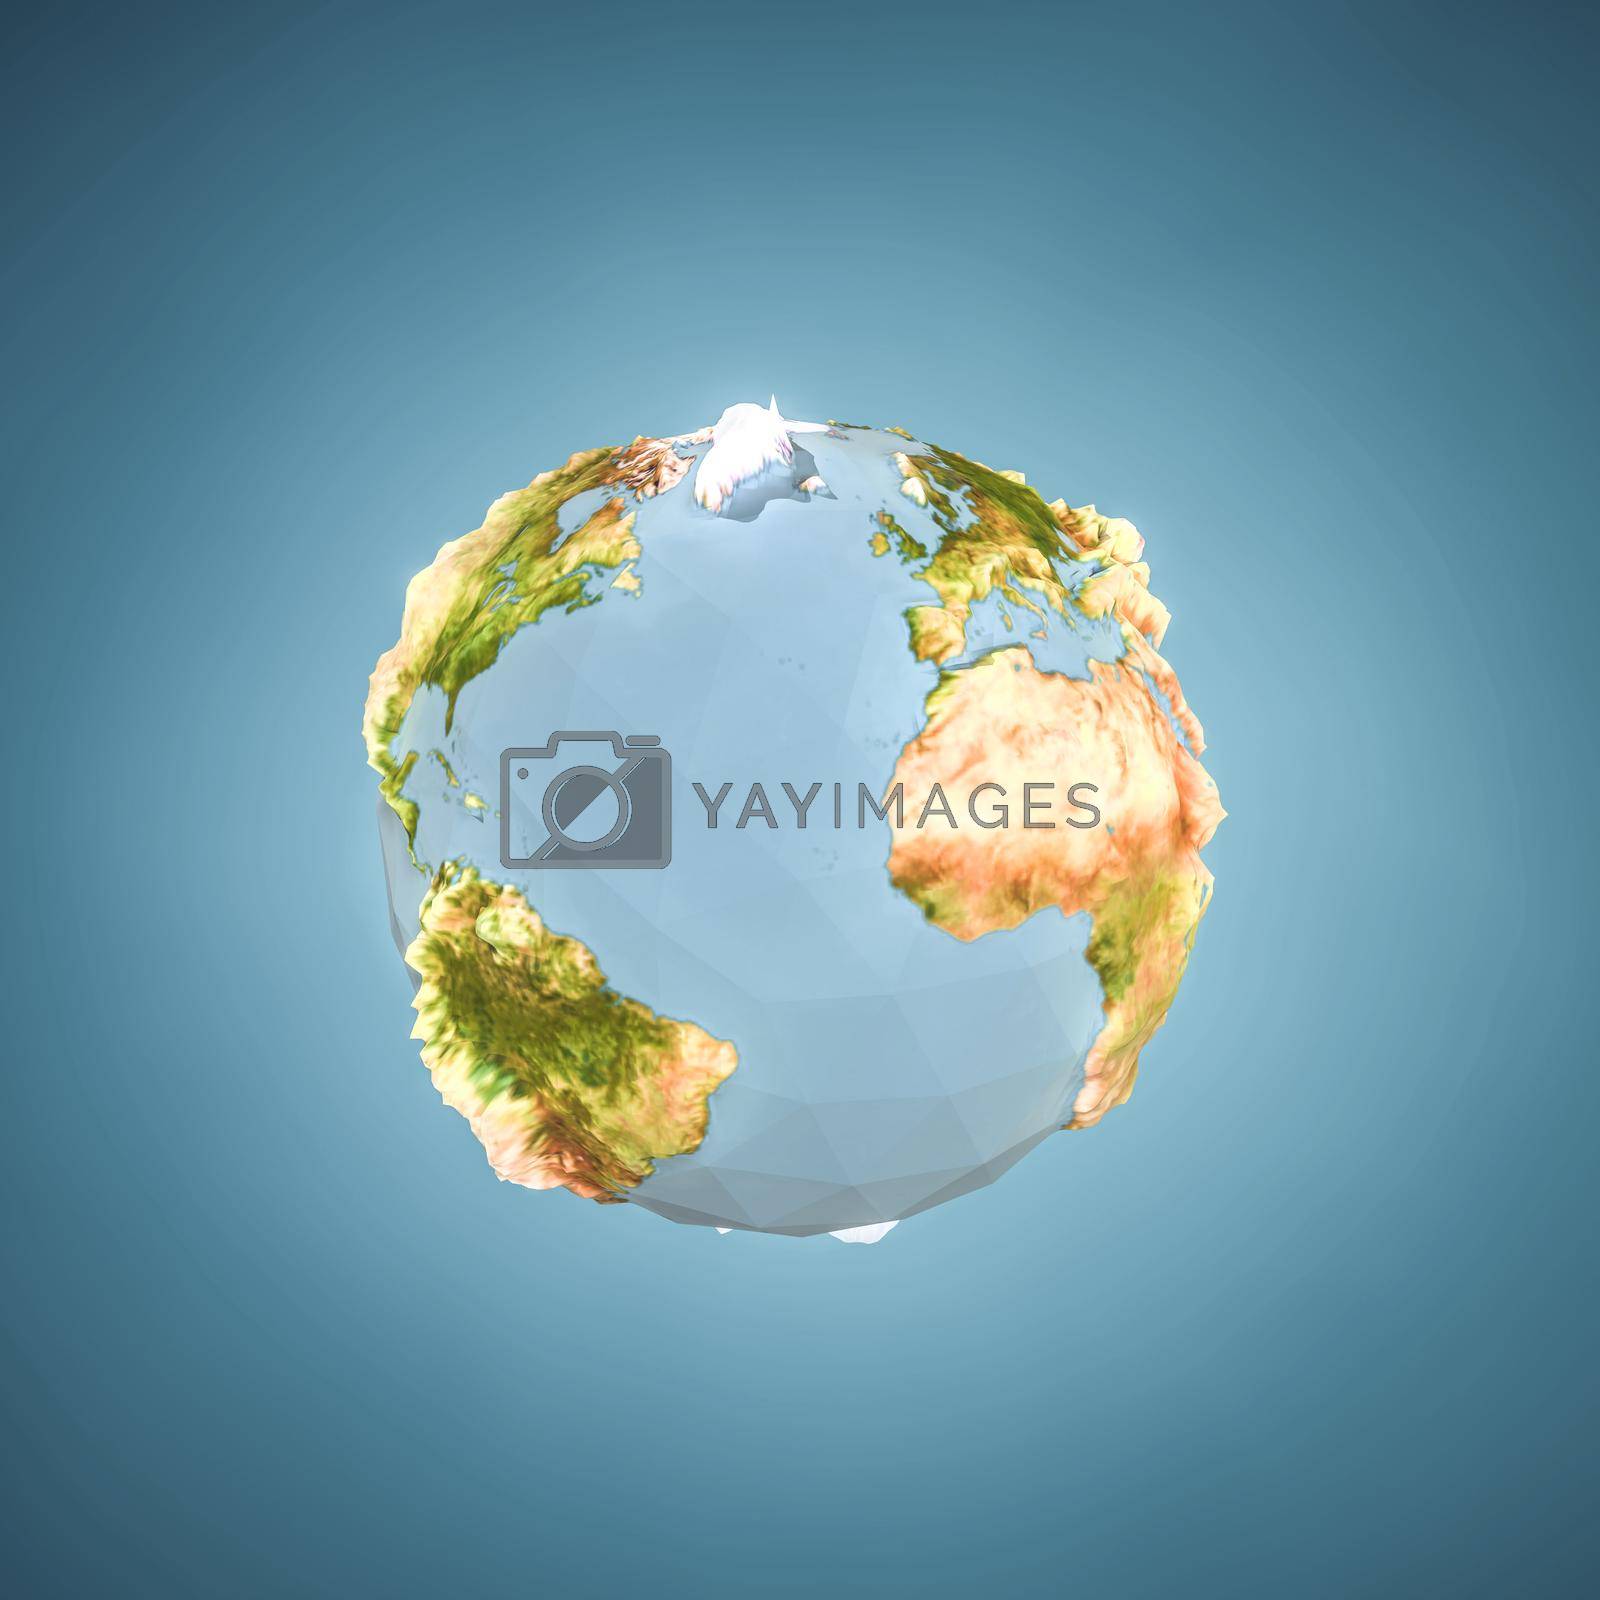 planet earth low poly 3d illustration